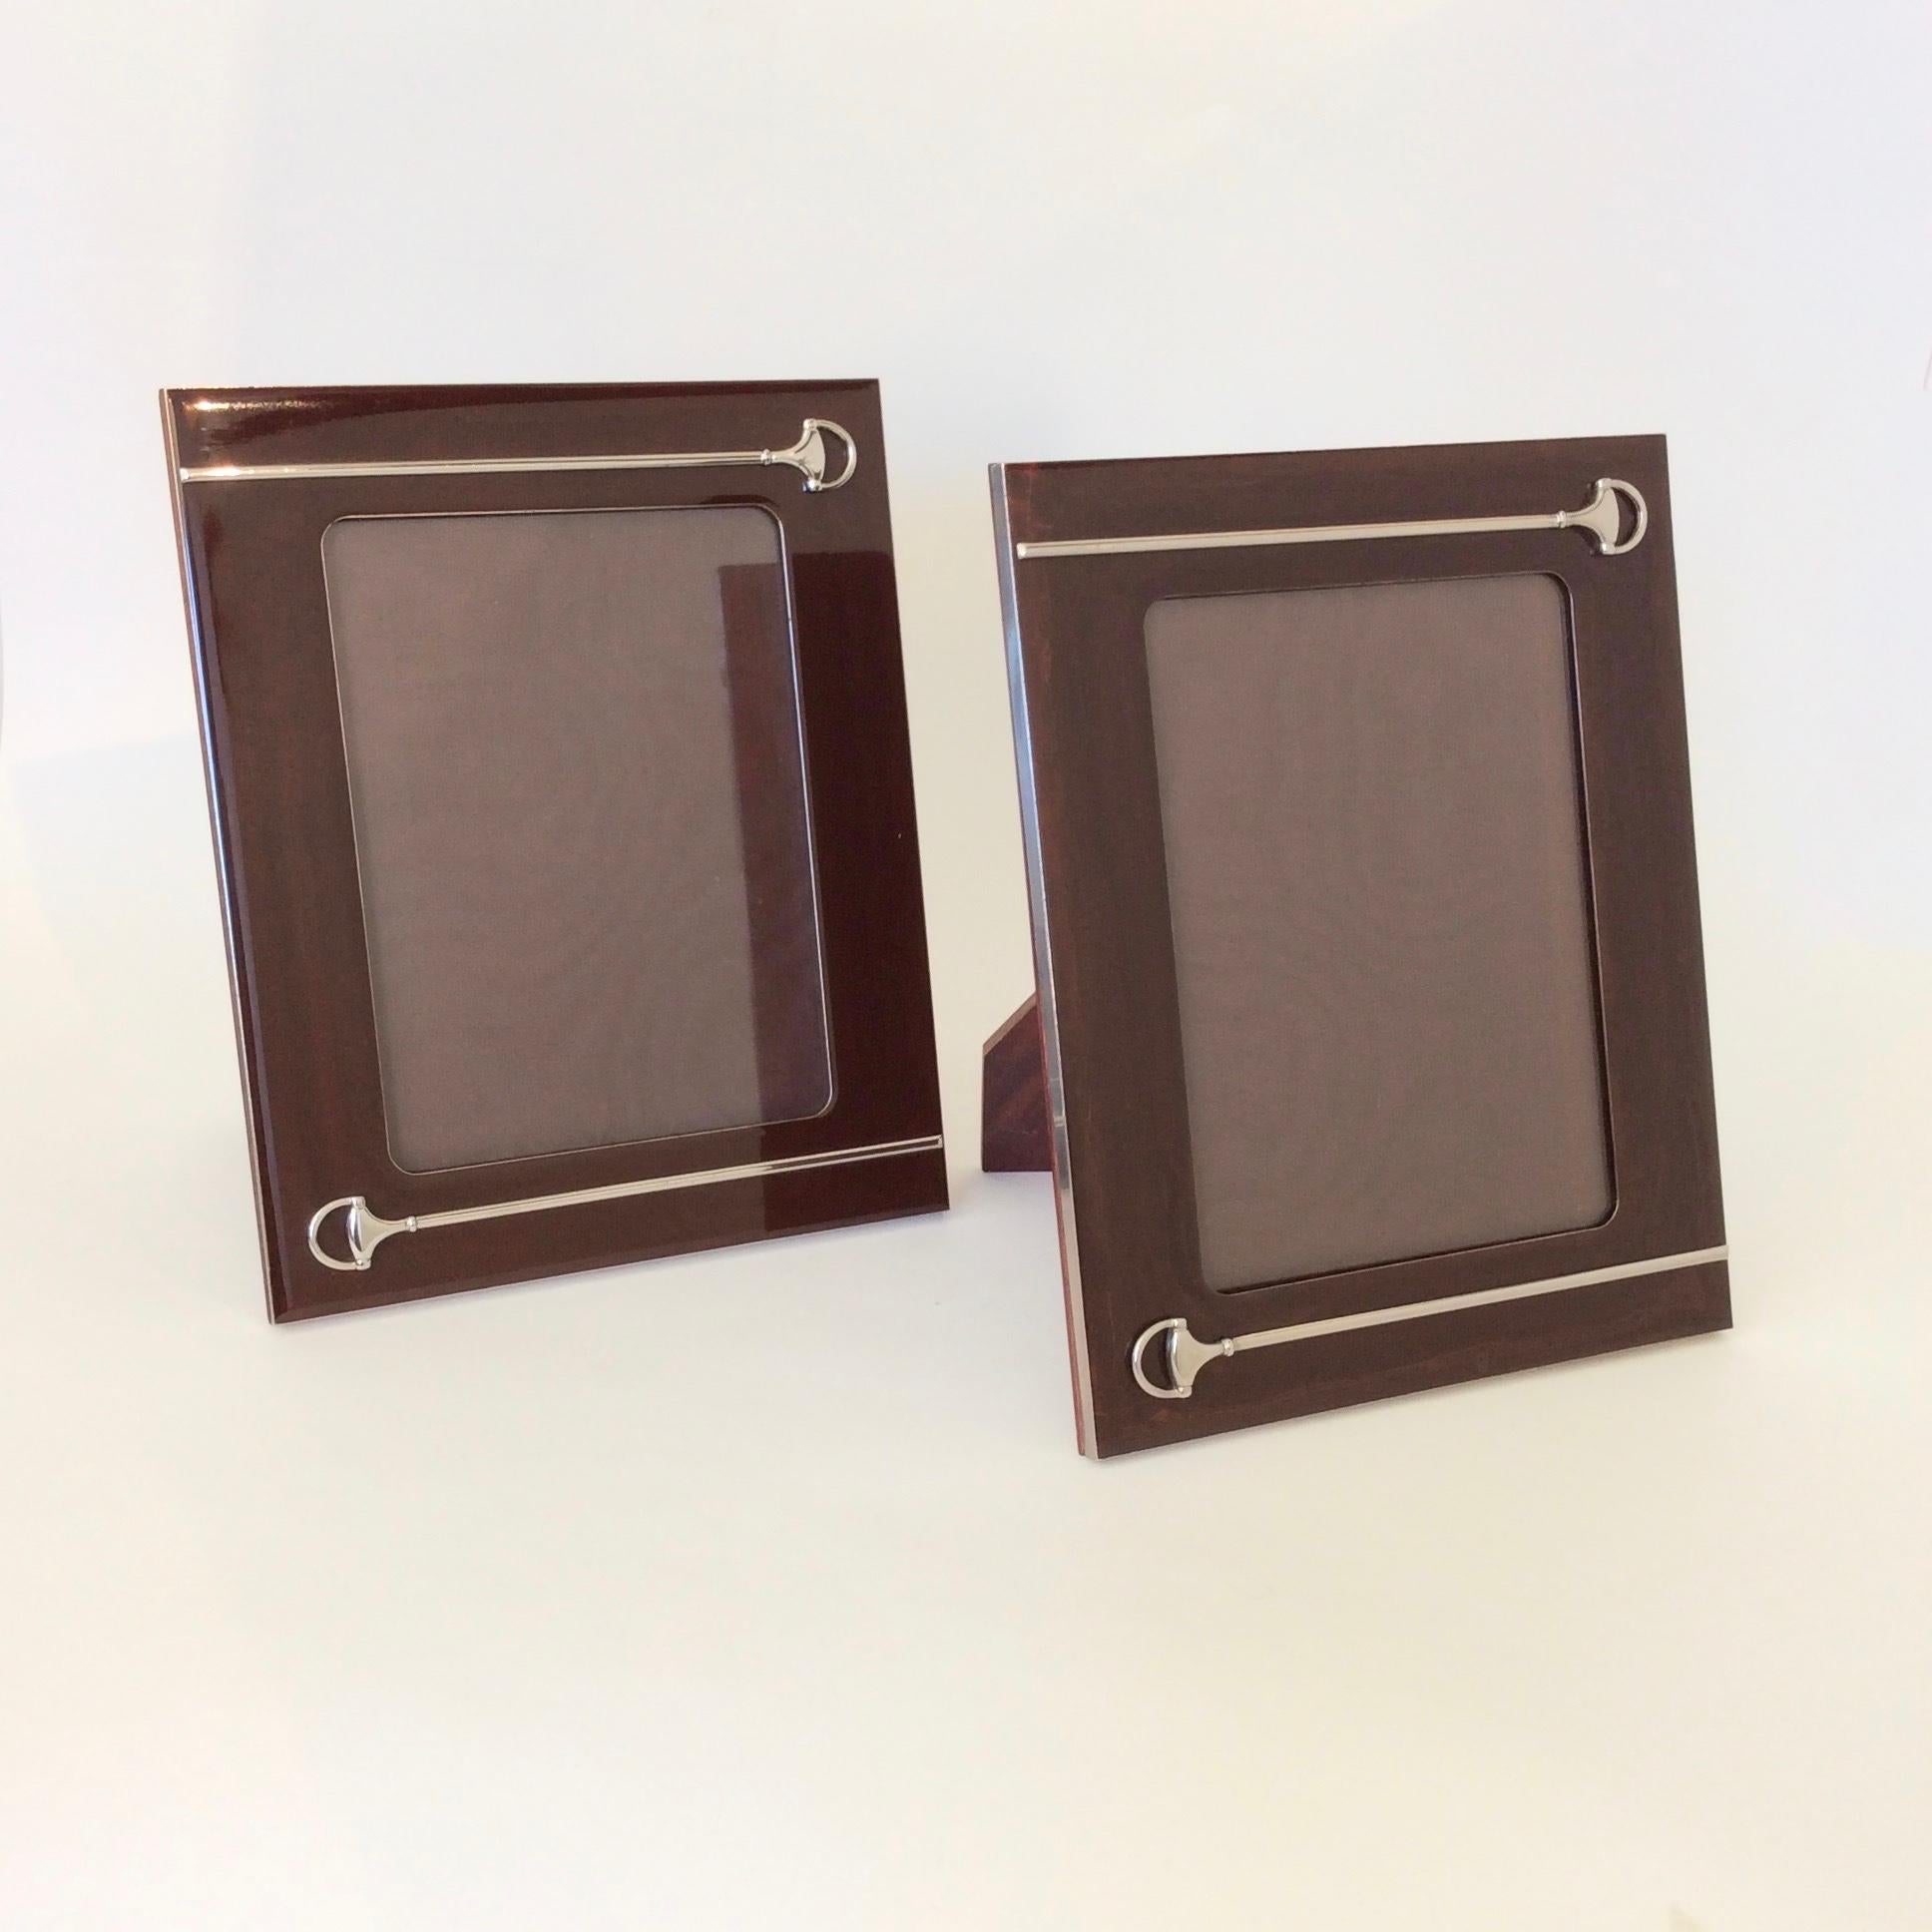 Elegant pair of Gucci equestrian motif picture frame, circa 1970, Italy.
Lacquered mahogany and silver plated metal.
Dimensions: 25 cm H, 20 cm W, 15 cm D.
Good condition.
We ship worldwide.